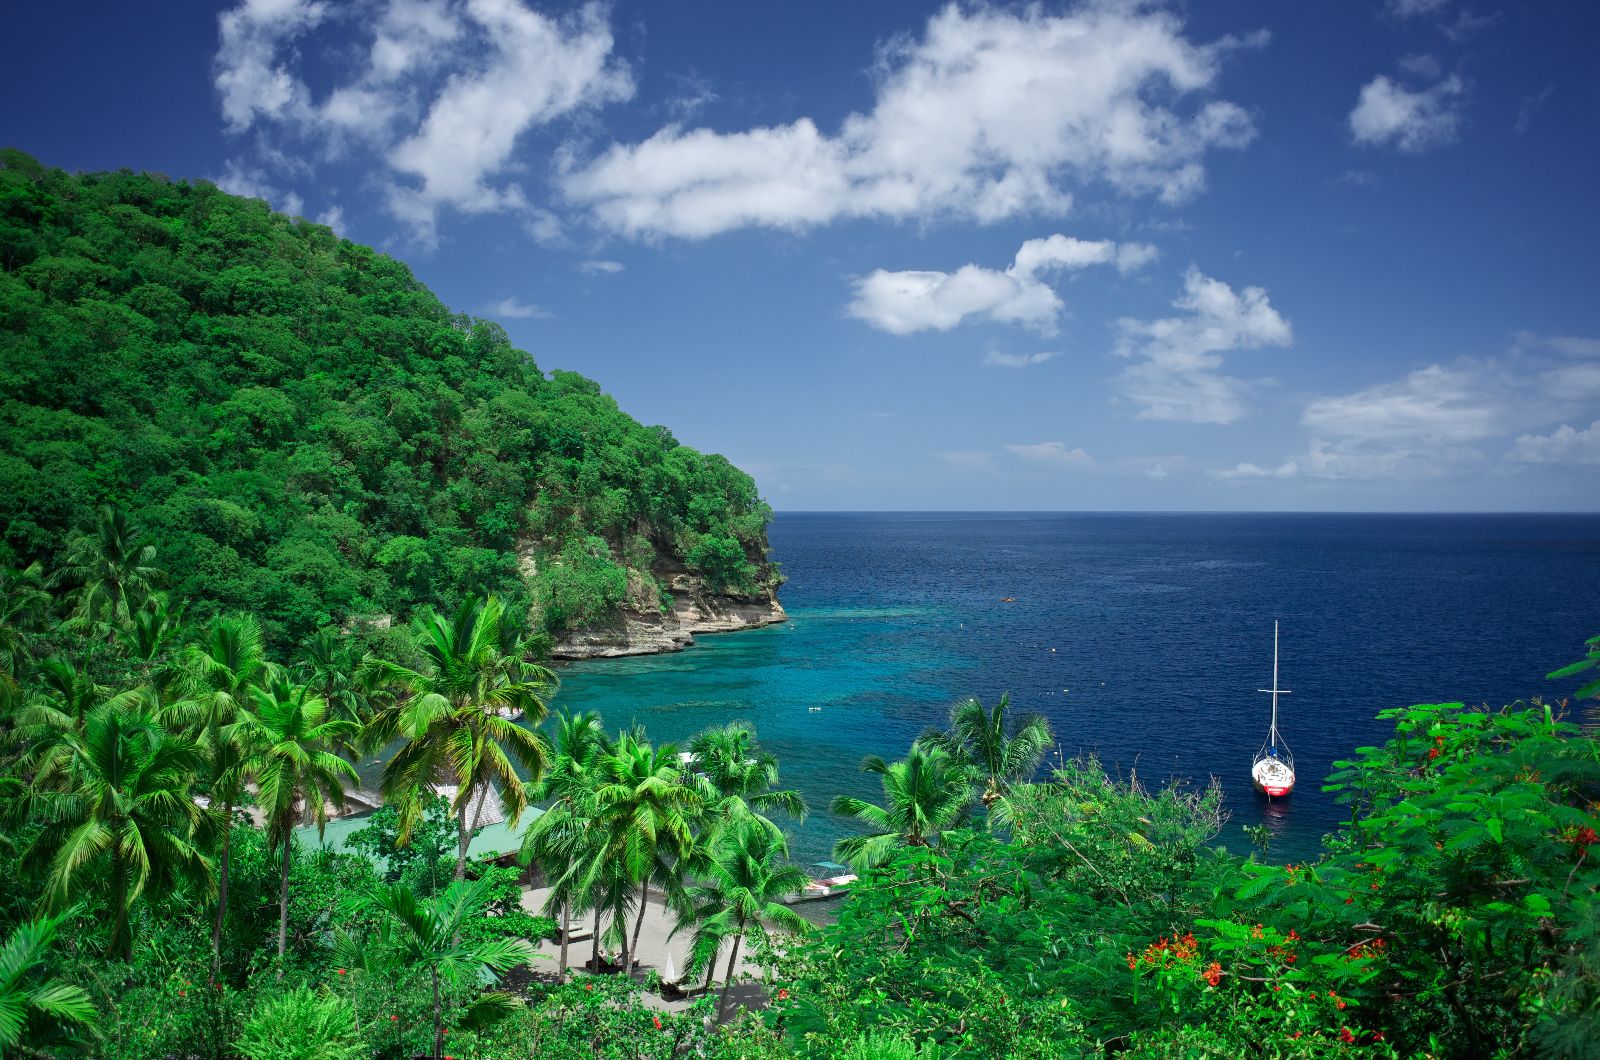 The bay and forested hills surrounding the Anse Chastanet in St Lucia